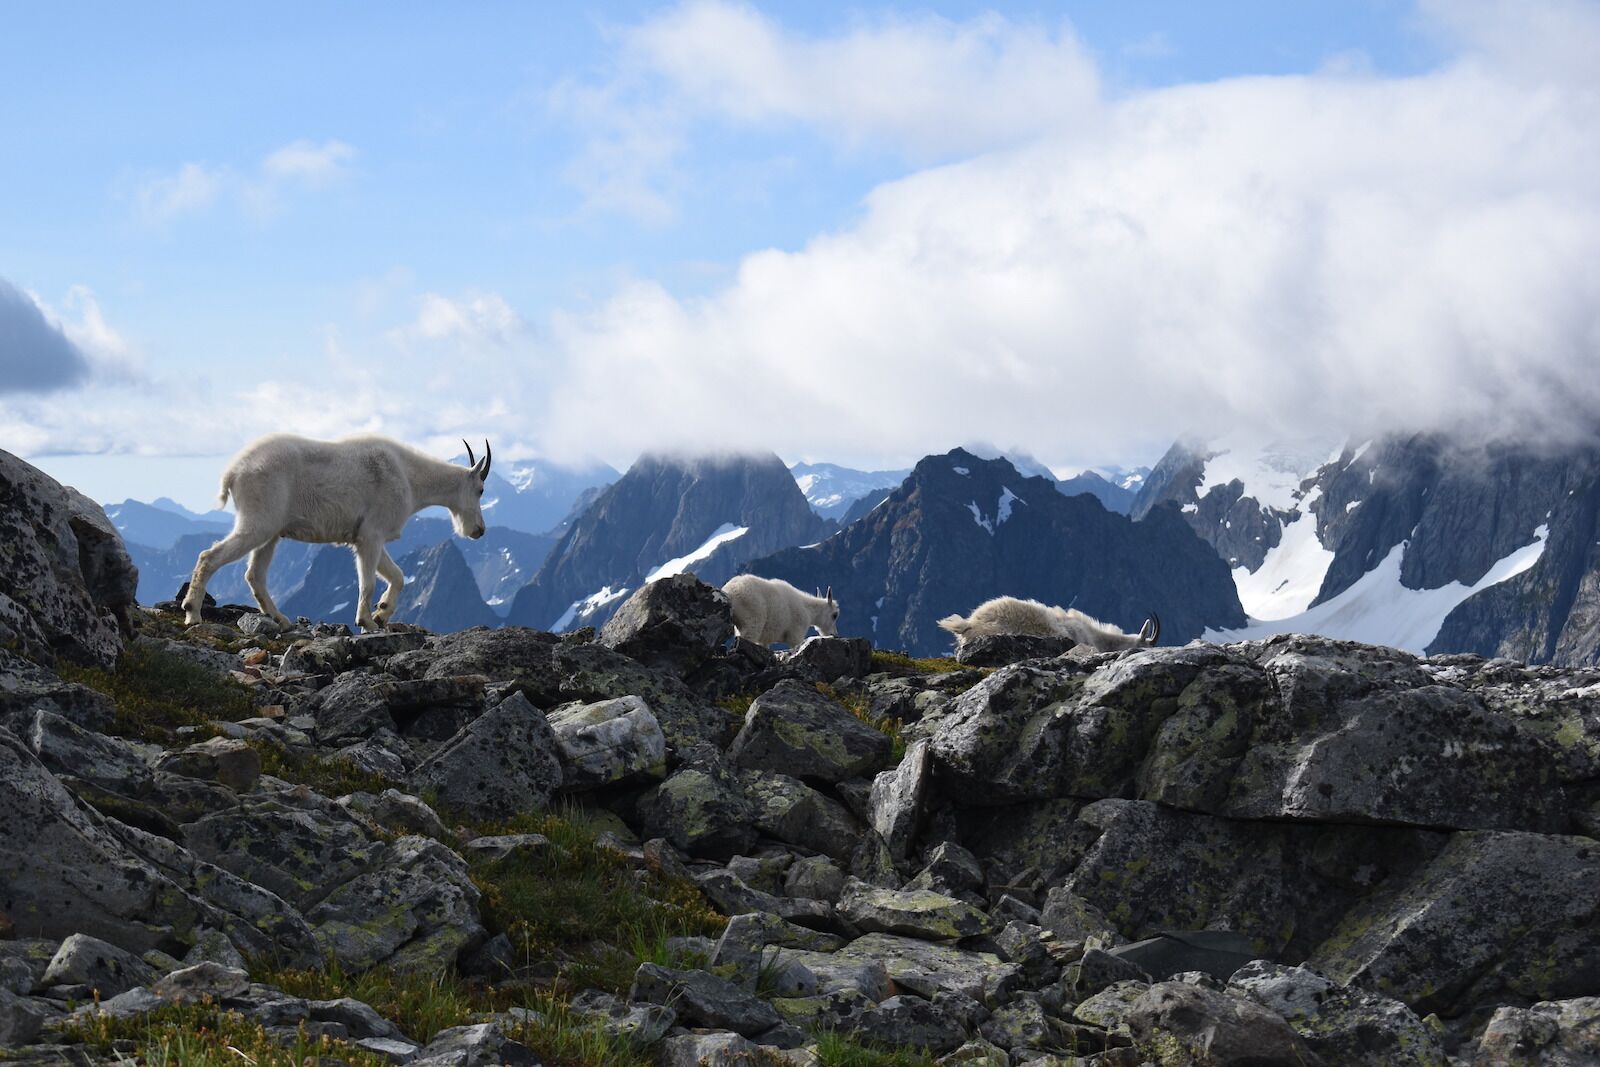 Goats atop Cascade Pass, one of the hardest hikes in the US national park system you can finish in a day